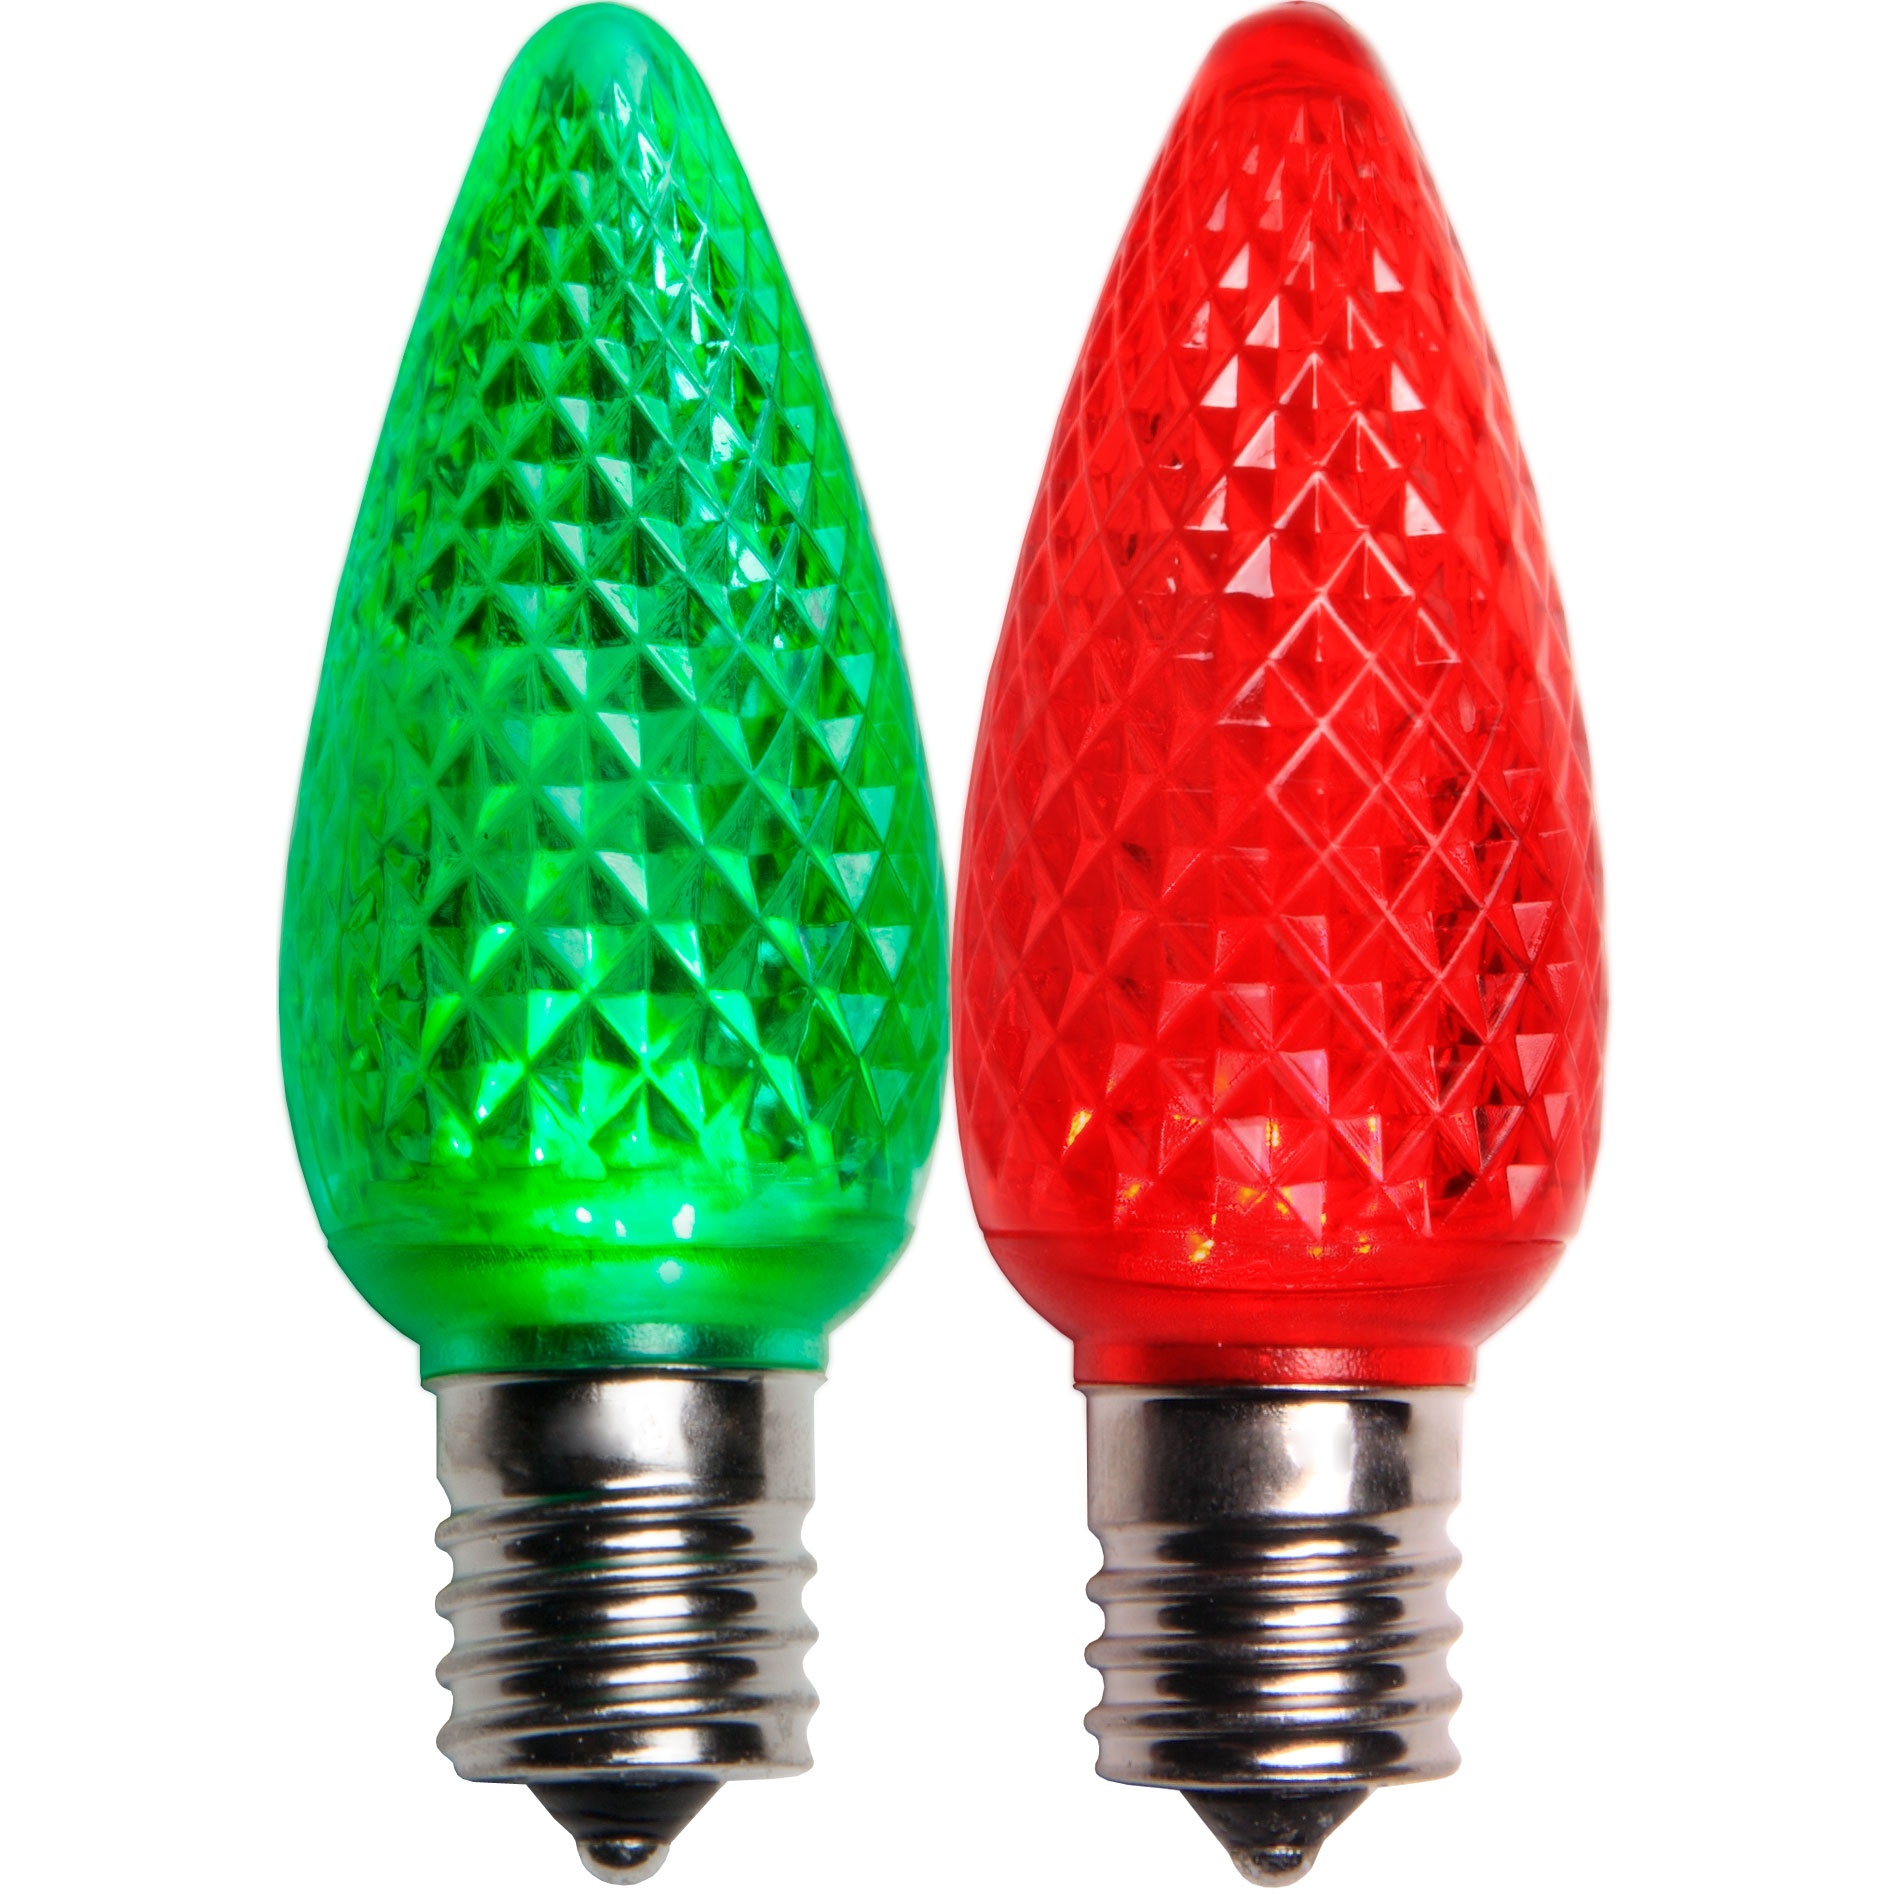 Home « Christmas Decorations « Specialty Lights « Specialty Bulbs